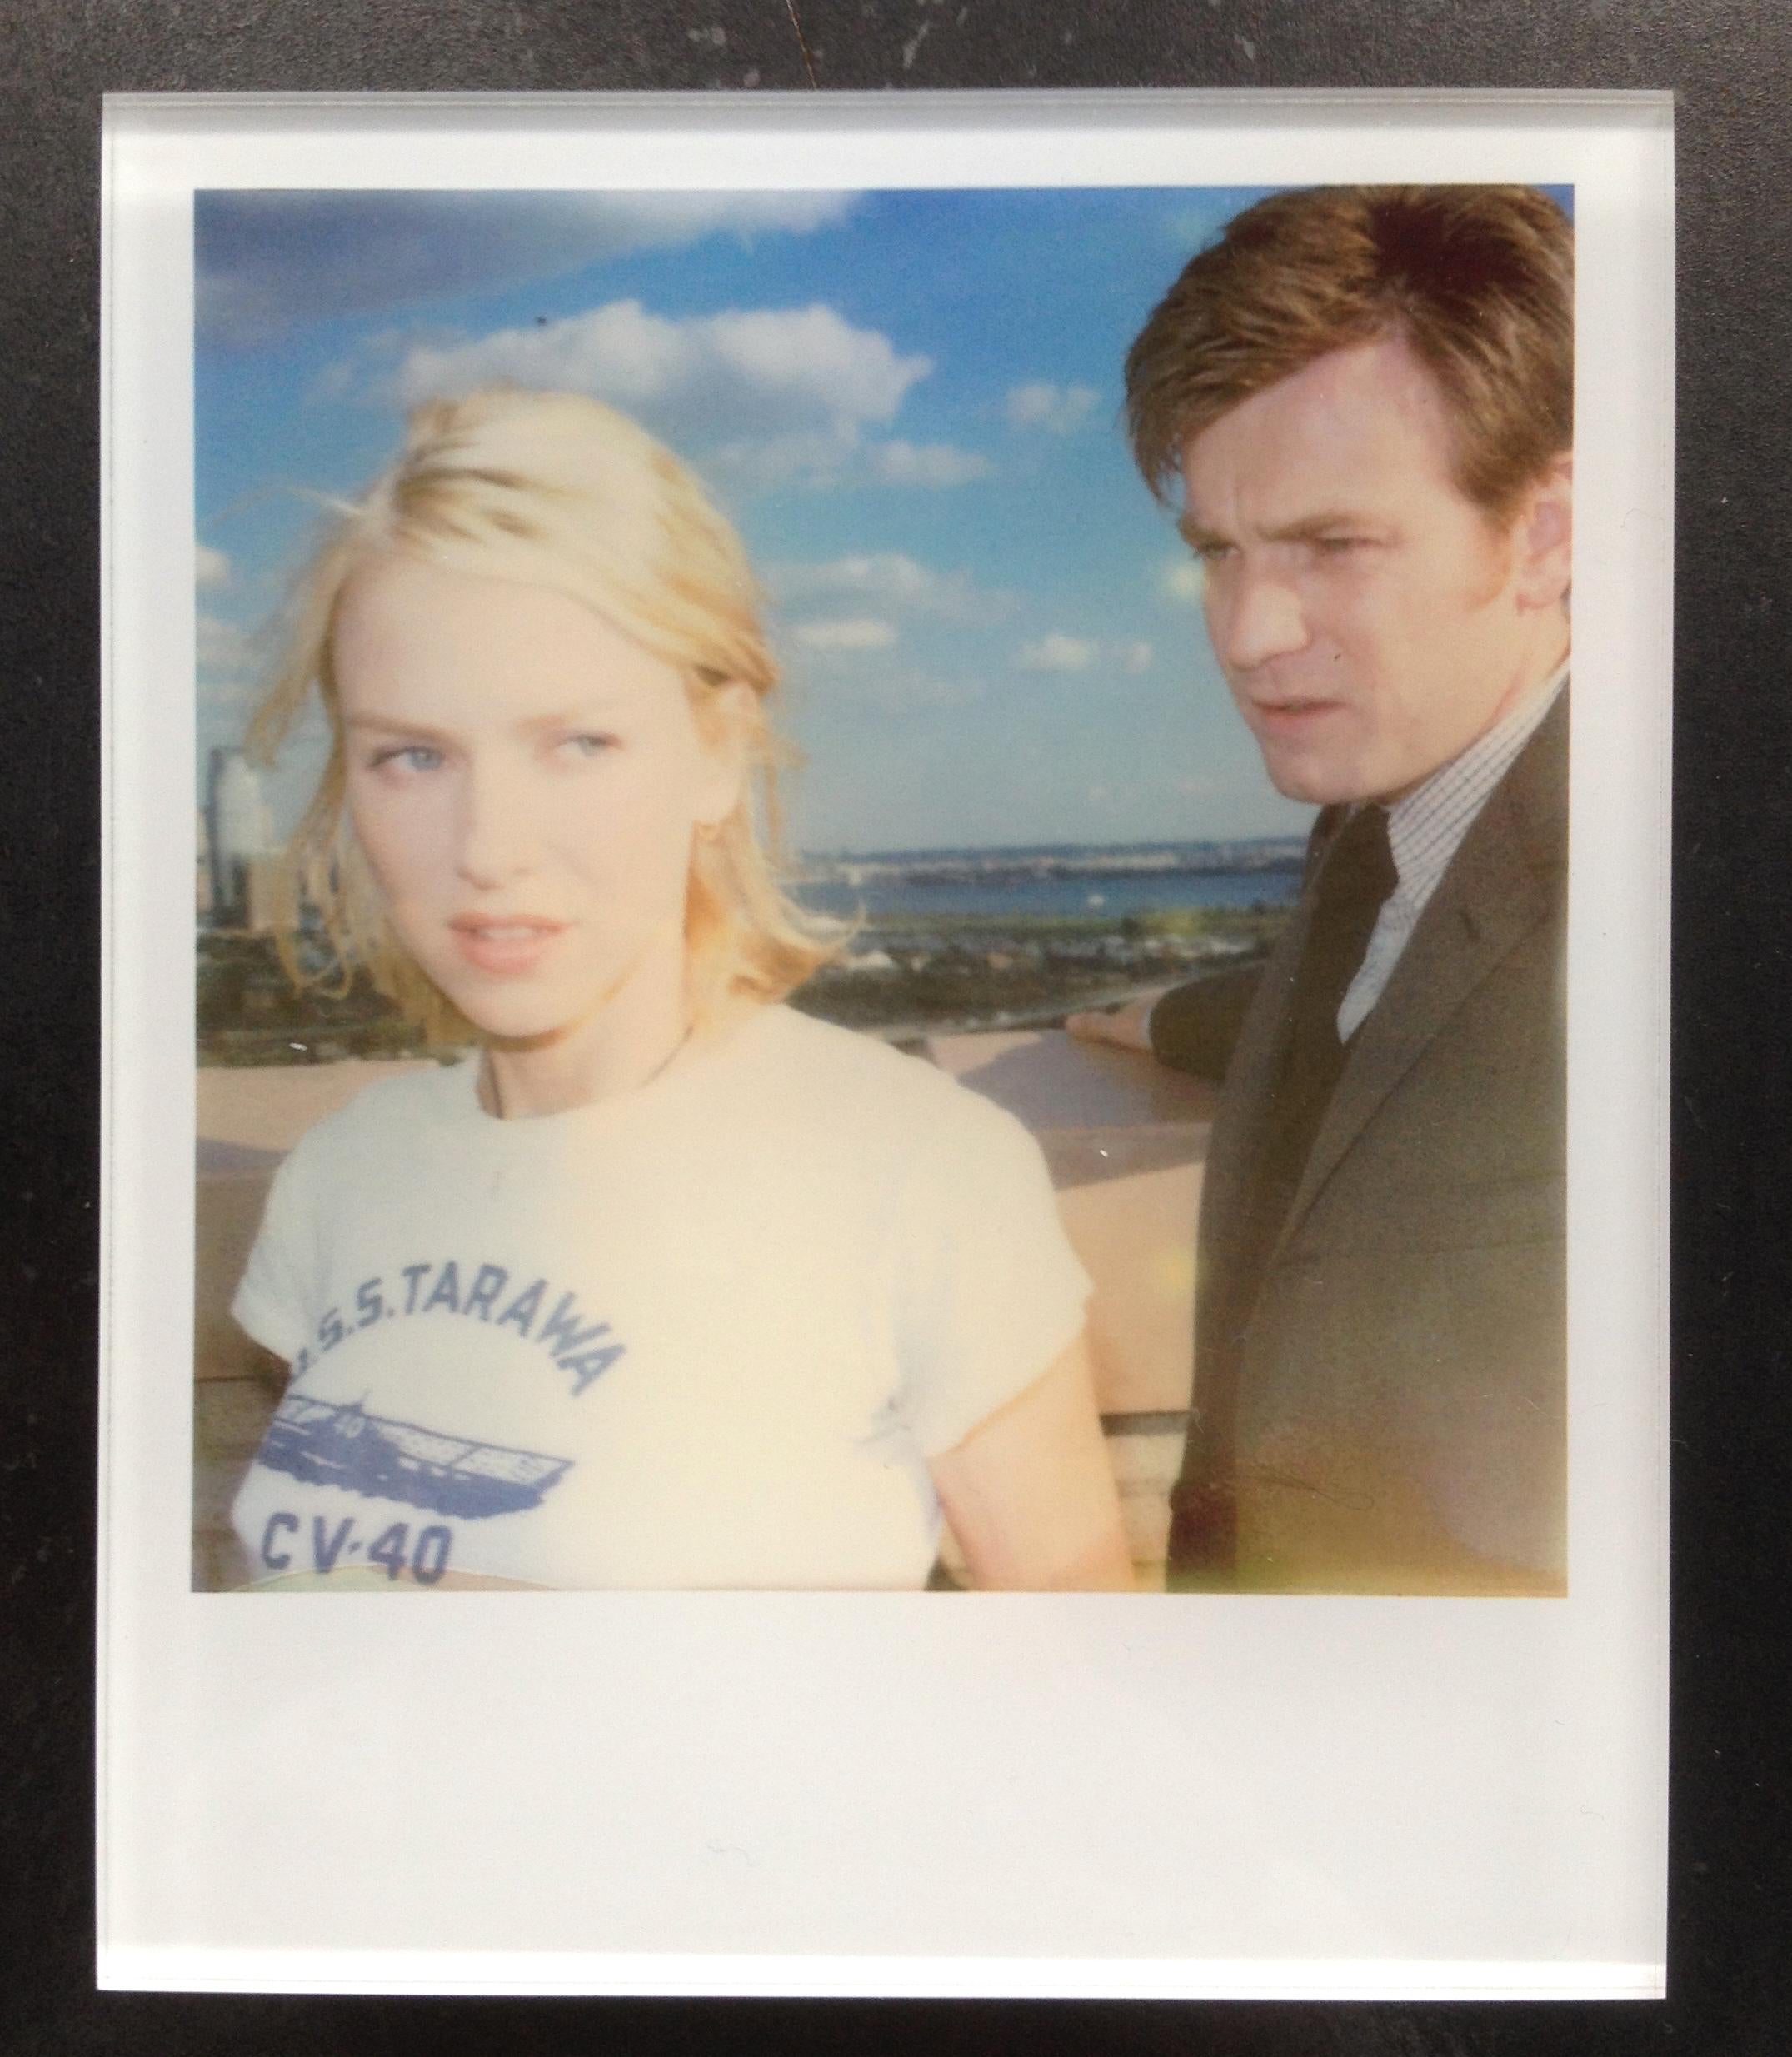 Stefanie Schneider's Minis
'Lila and Sam" (Stay), 2006
signed and signature brand on verso
Lambda digital Color Photograph based on a Polaroid

from the movie 'Stay' by Marc Forster, featuring Ewan McGregor and Naomi Watts.

Polaroid sized open